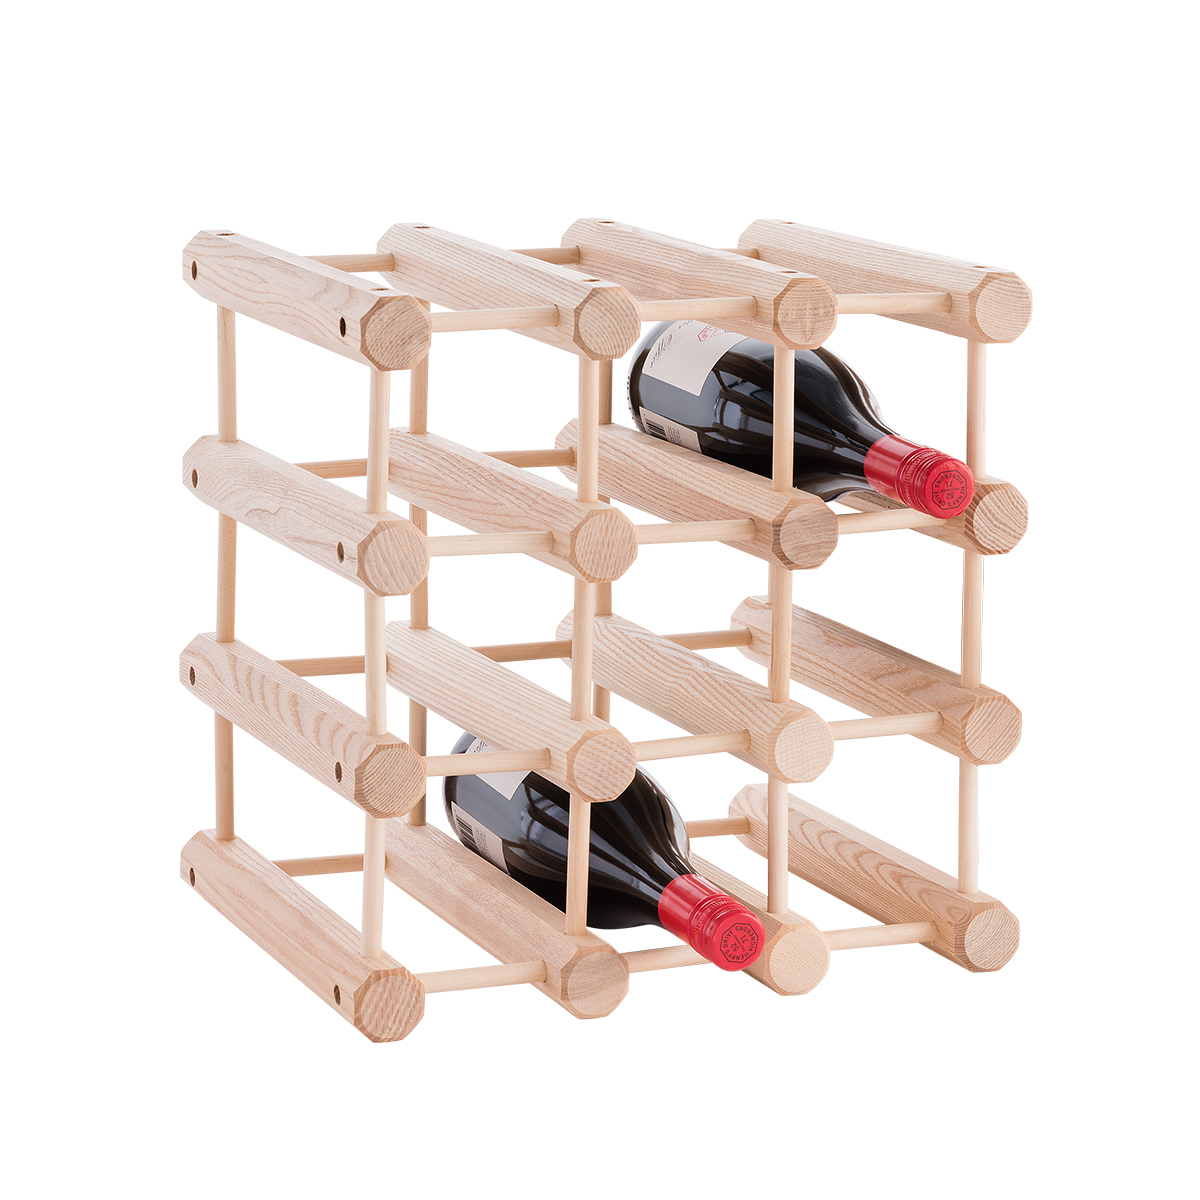 Storvino Wine Crate  The Container Store